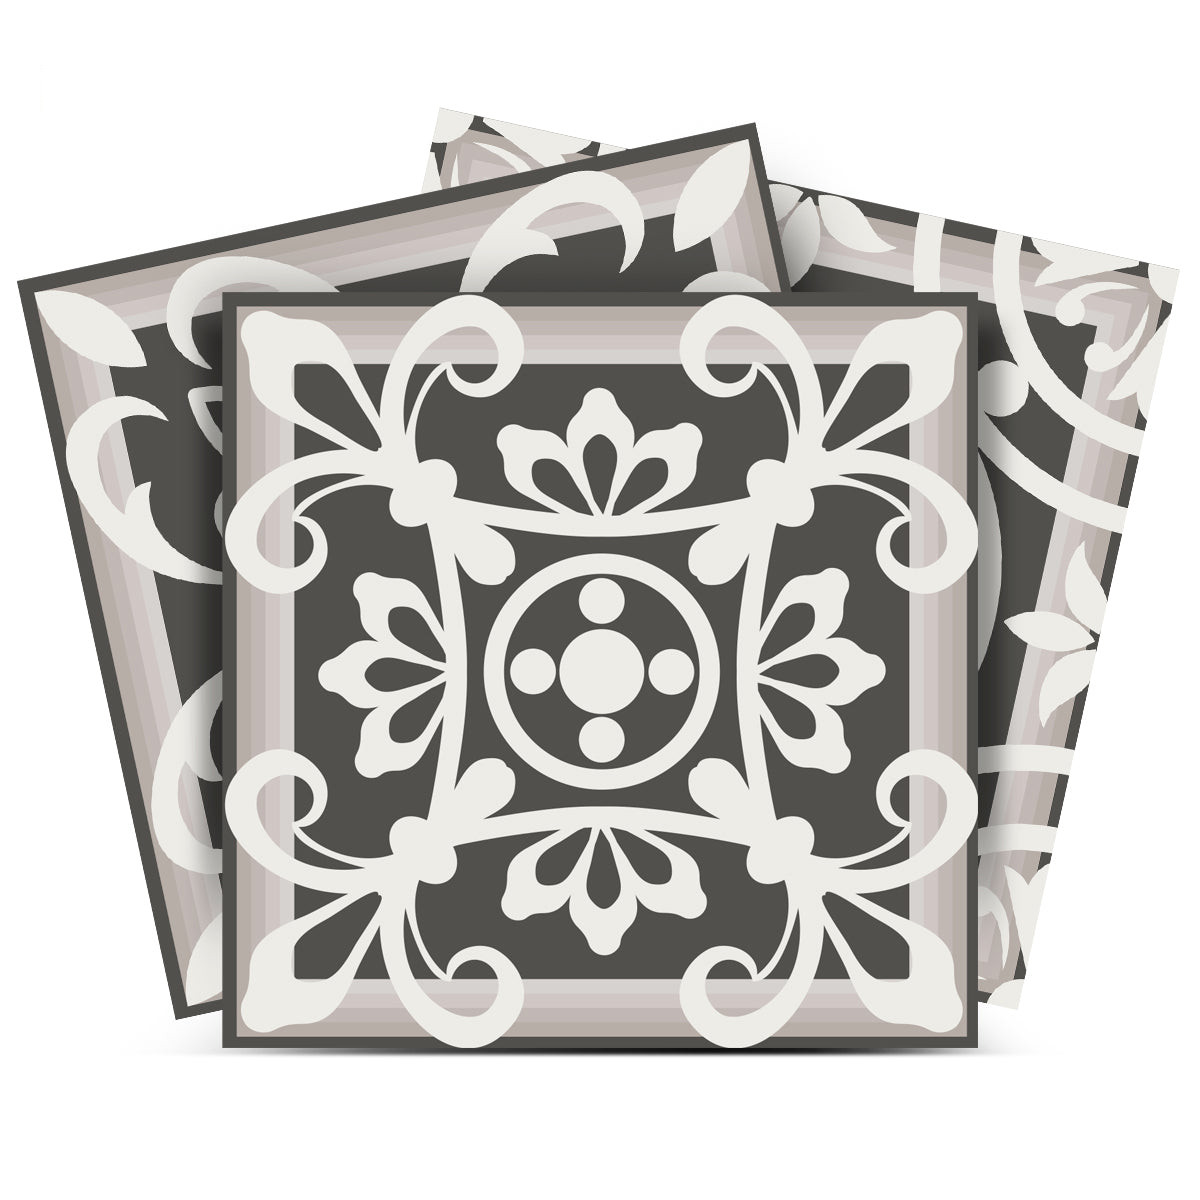 7" x 7" Wood Brown and White Mosaic Peel and Stick Removable Tiles-400482-1